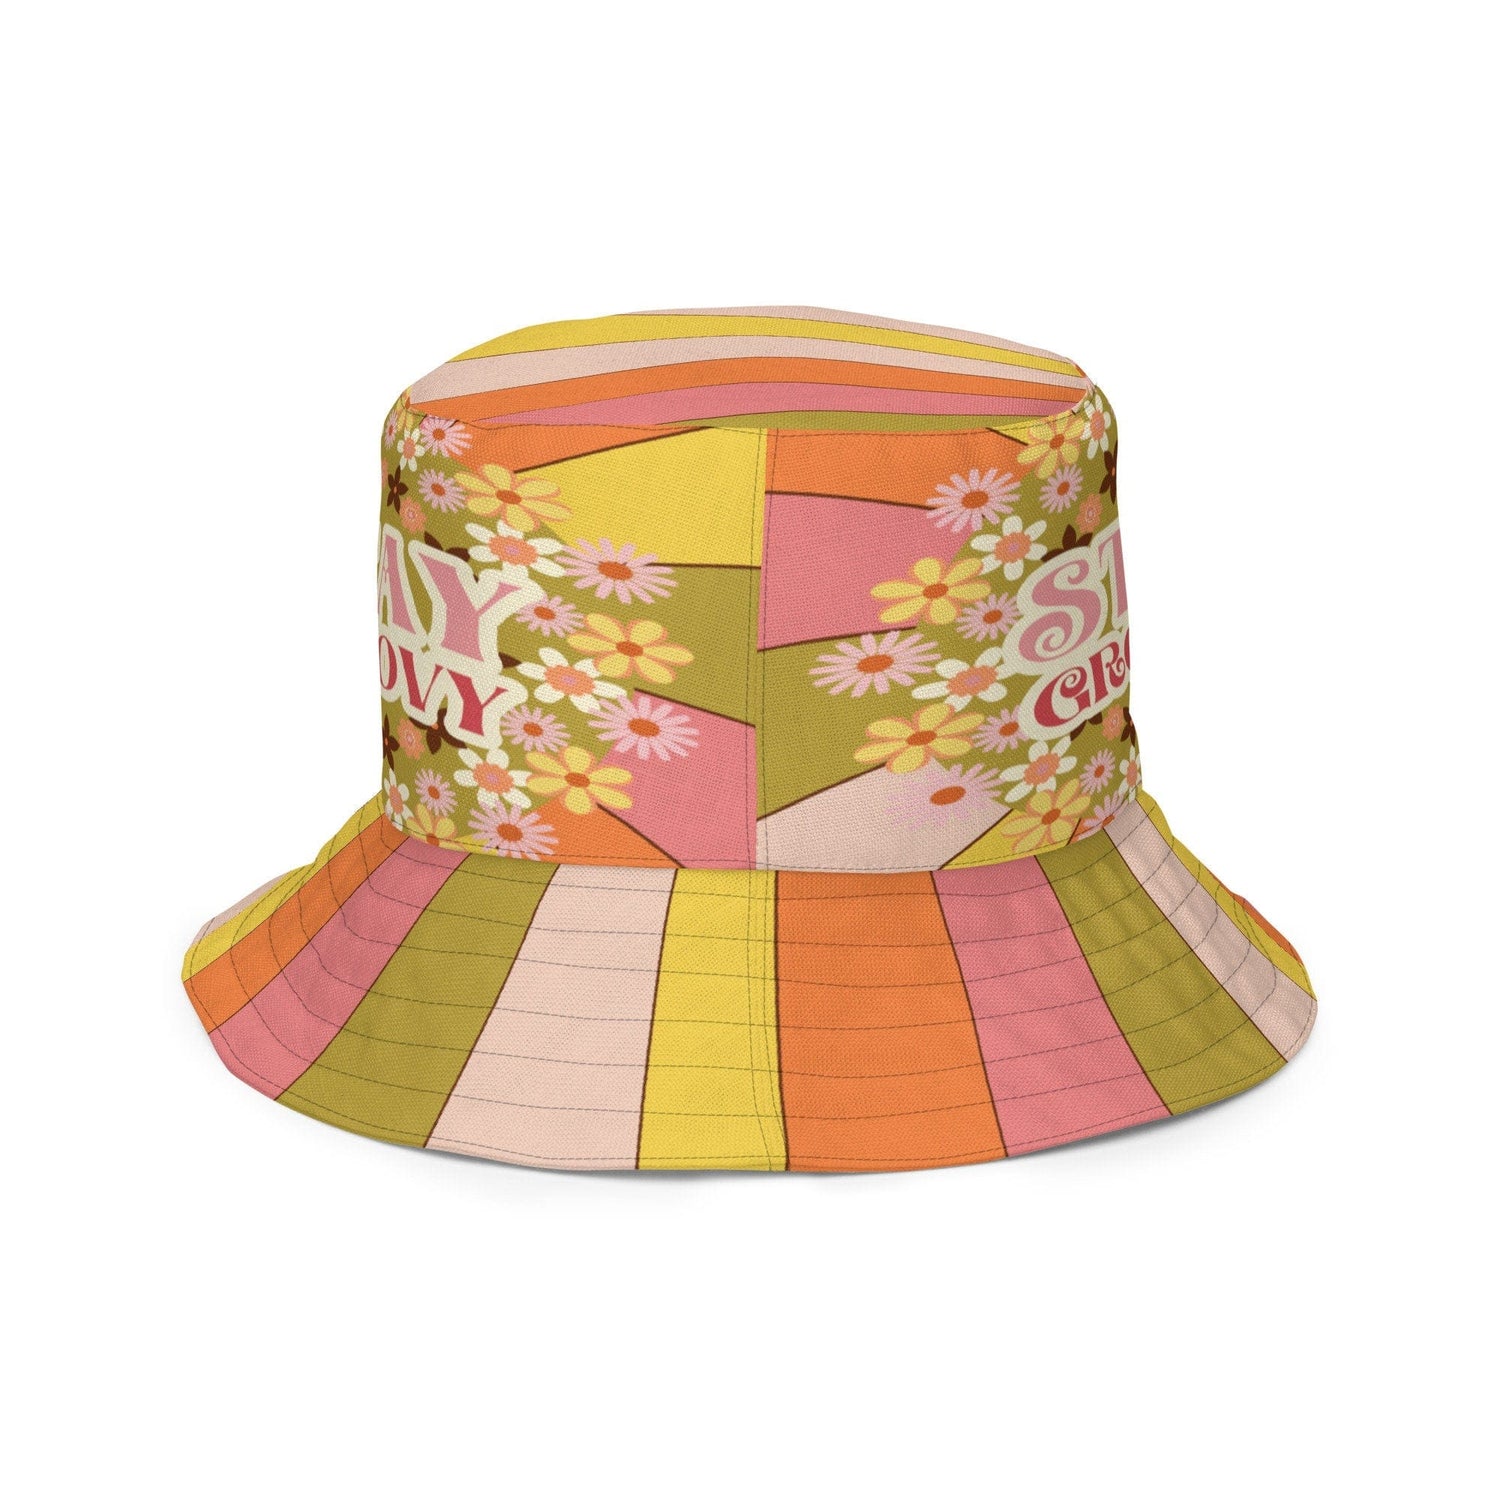 Kate McEnroe New York 70s Groovy Hippie Sunkissed Reversible Bucket HatHats63C775721B24A_16361